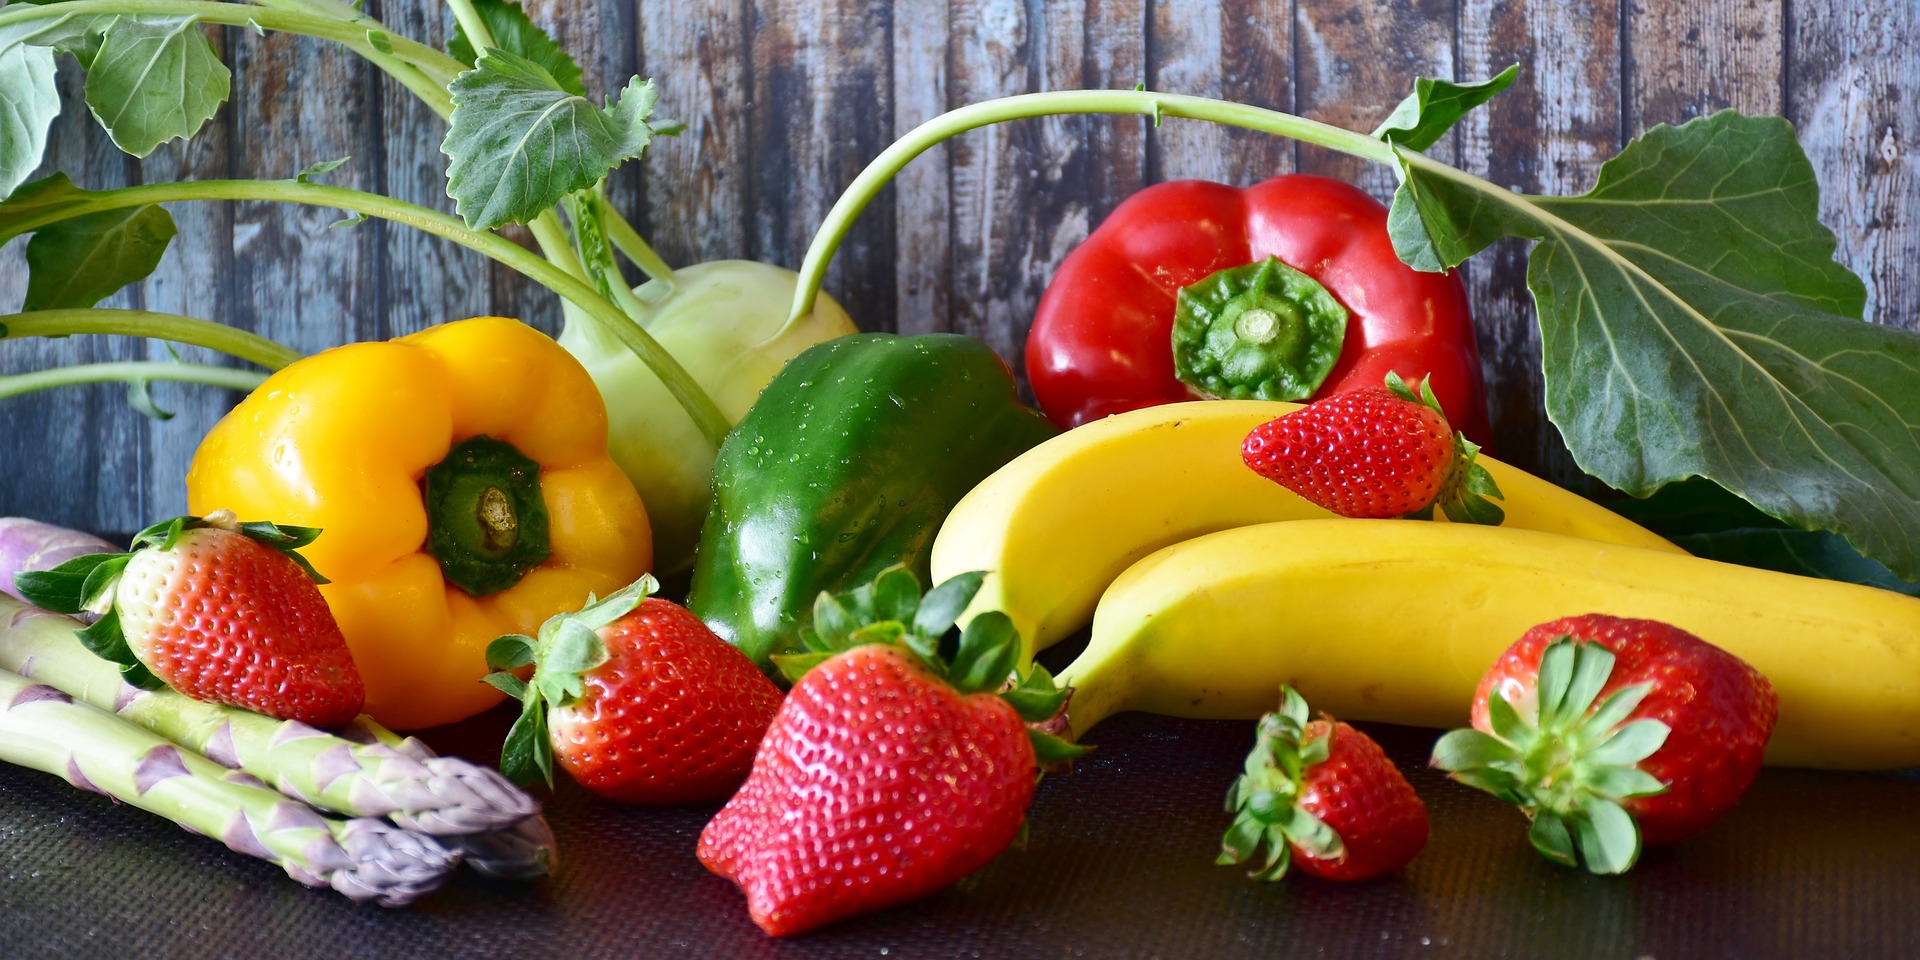 5 Surprising Health Benefits of Fruits and Vegetables